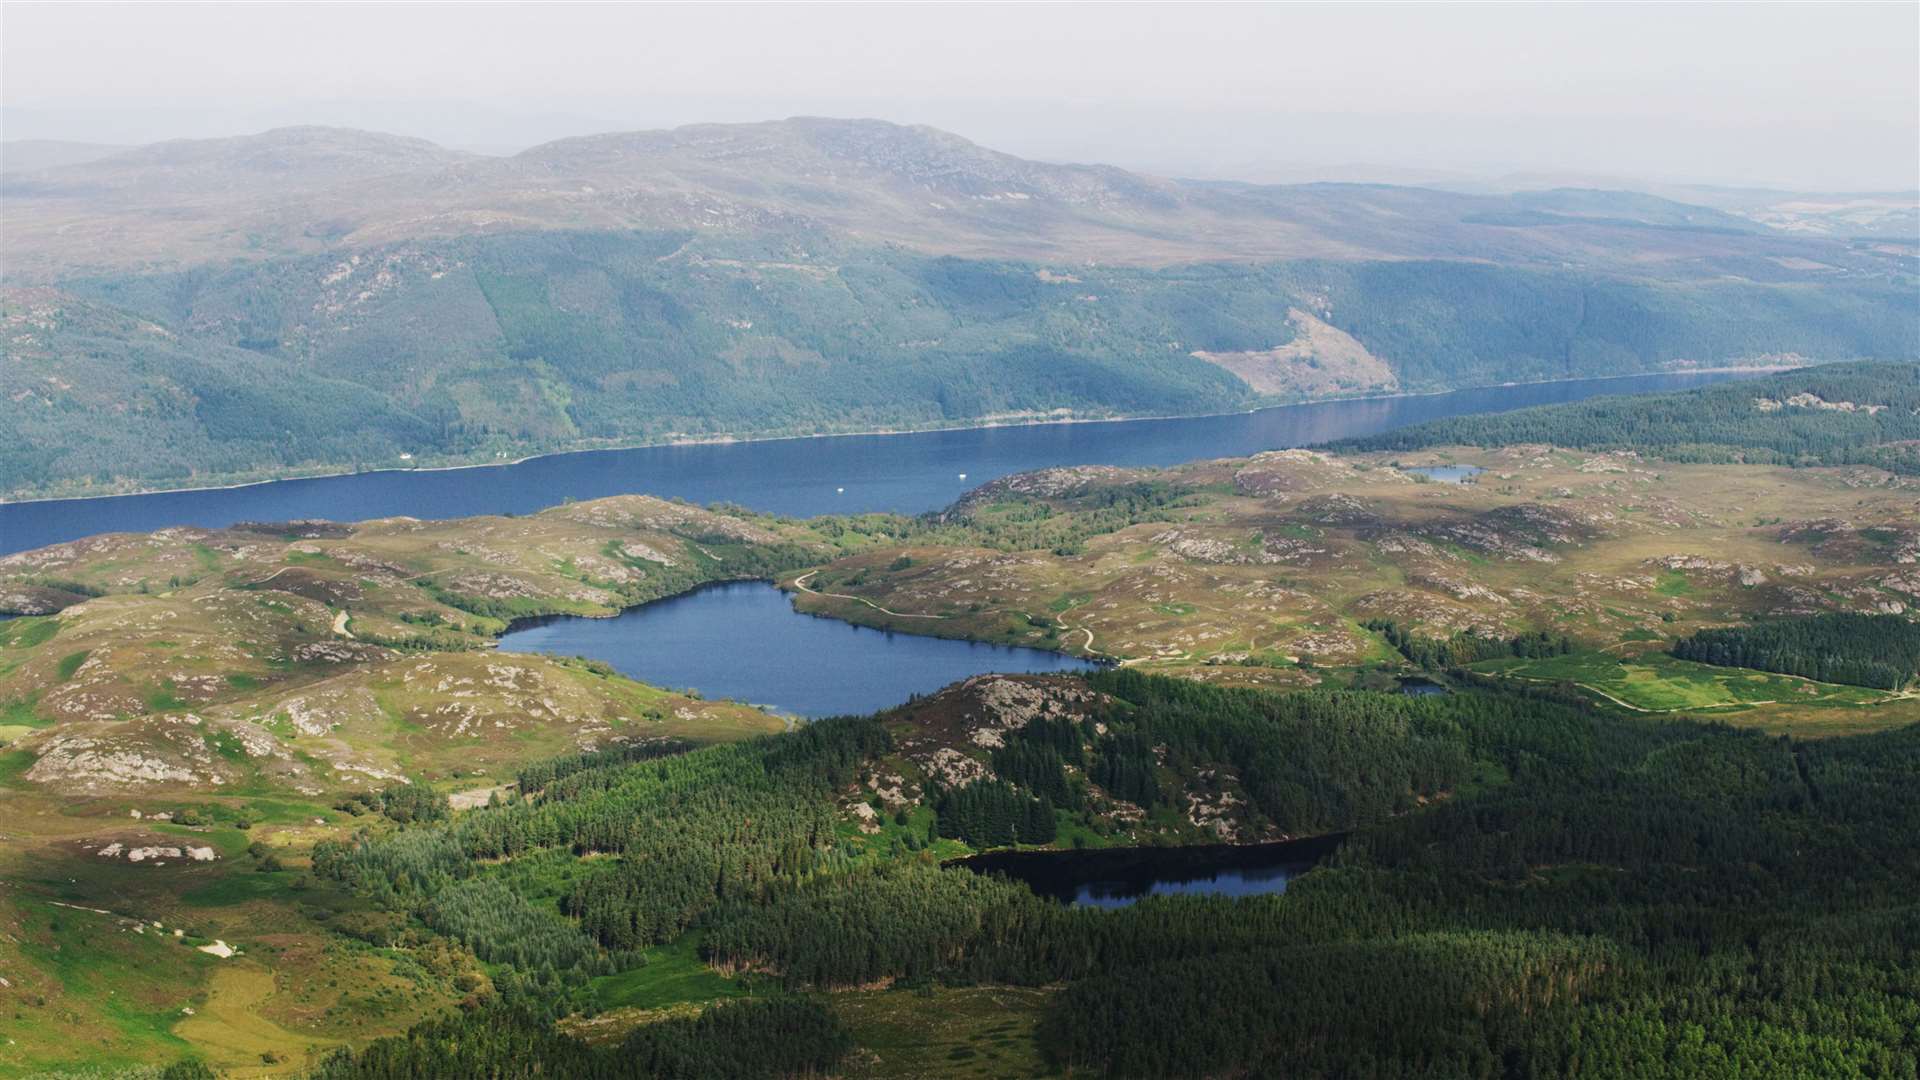 The proposed pumped storage hydro scheme would use Loch Ness and Loch Kemp.